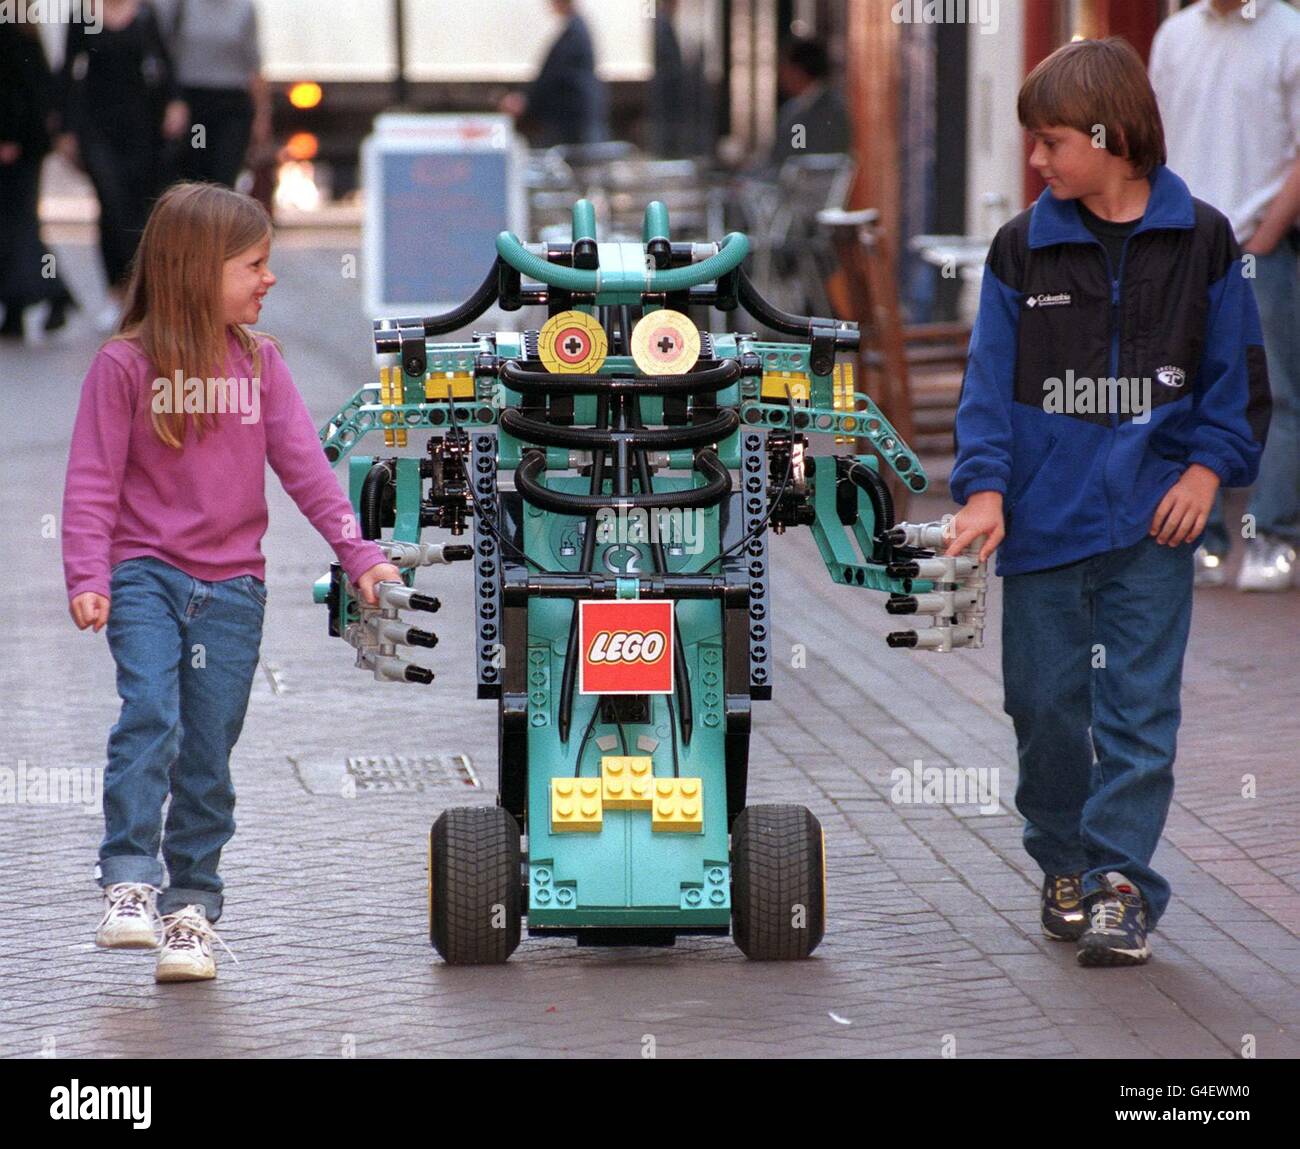 Crusher, from Lego's Cybermaster range walks down London's Regent Street with Torrie Moss, aged 7 and her brother Trevor 12, from Denver Colorado, this morning (Wednesday) during a photocall